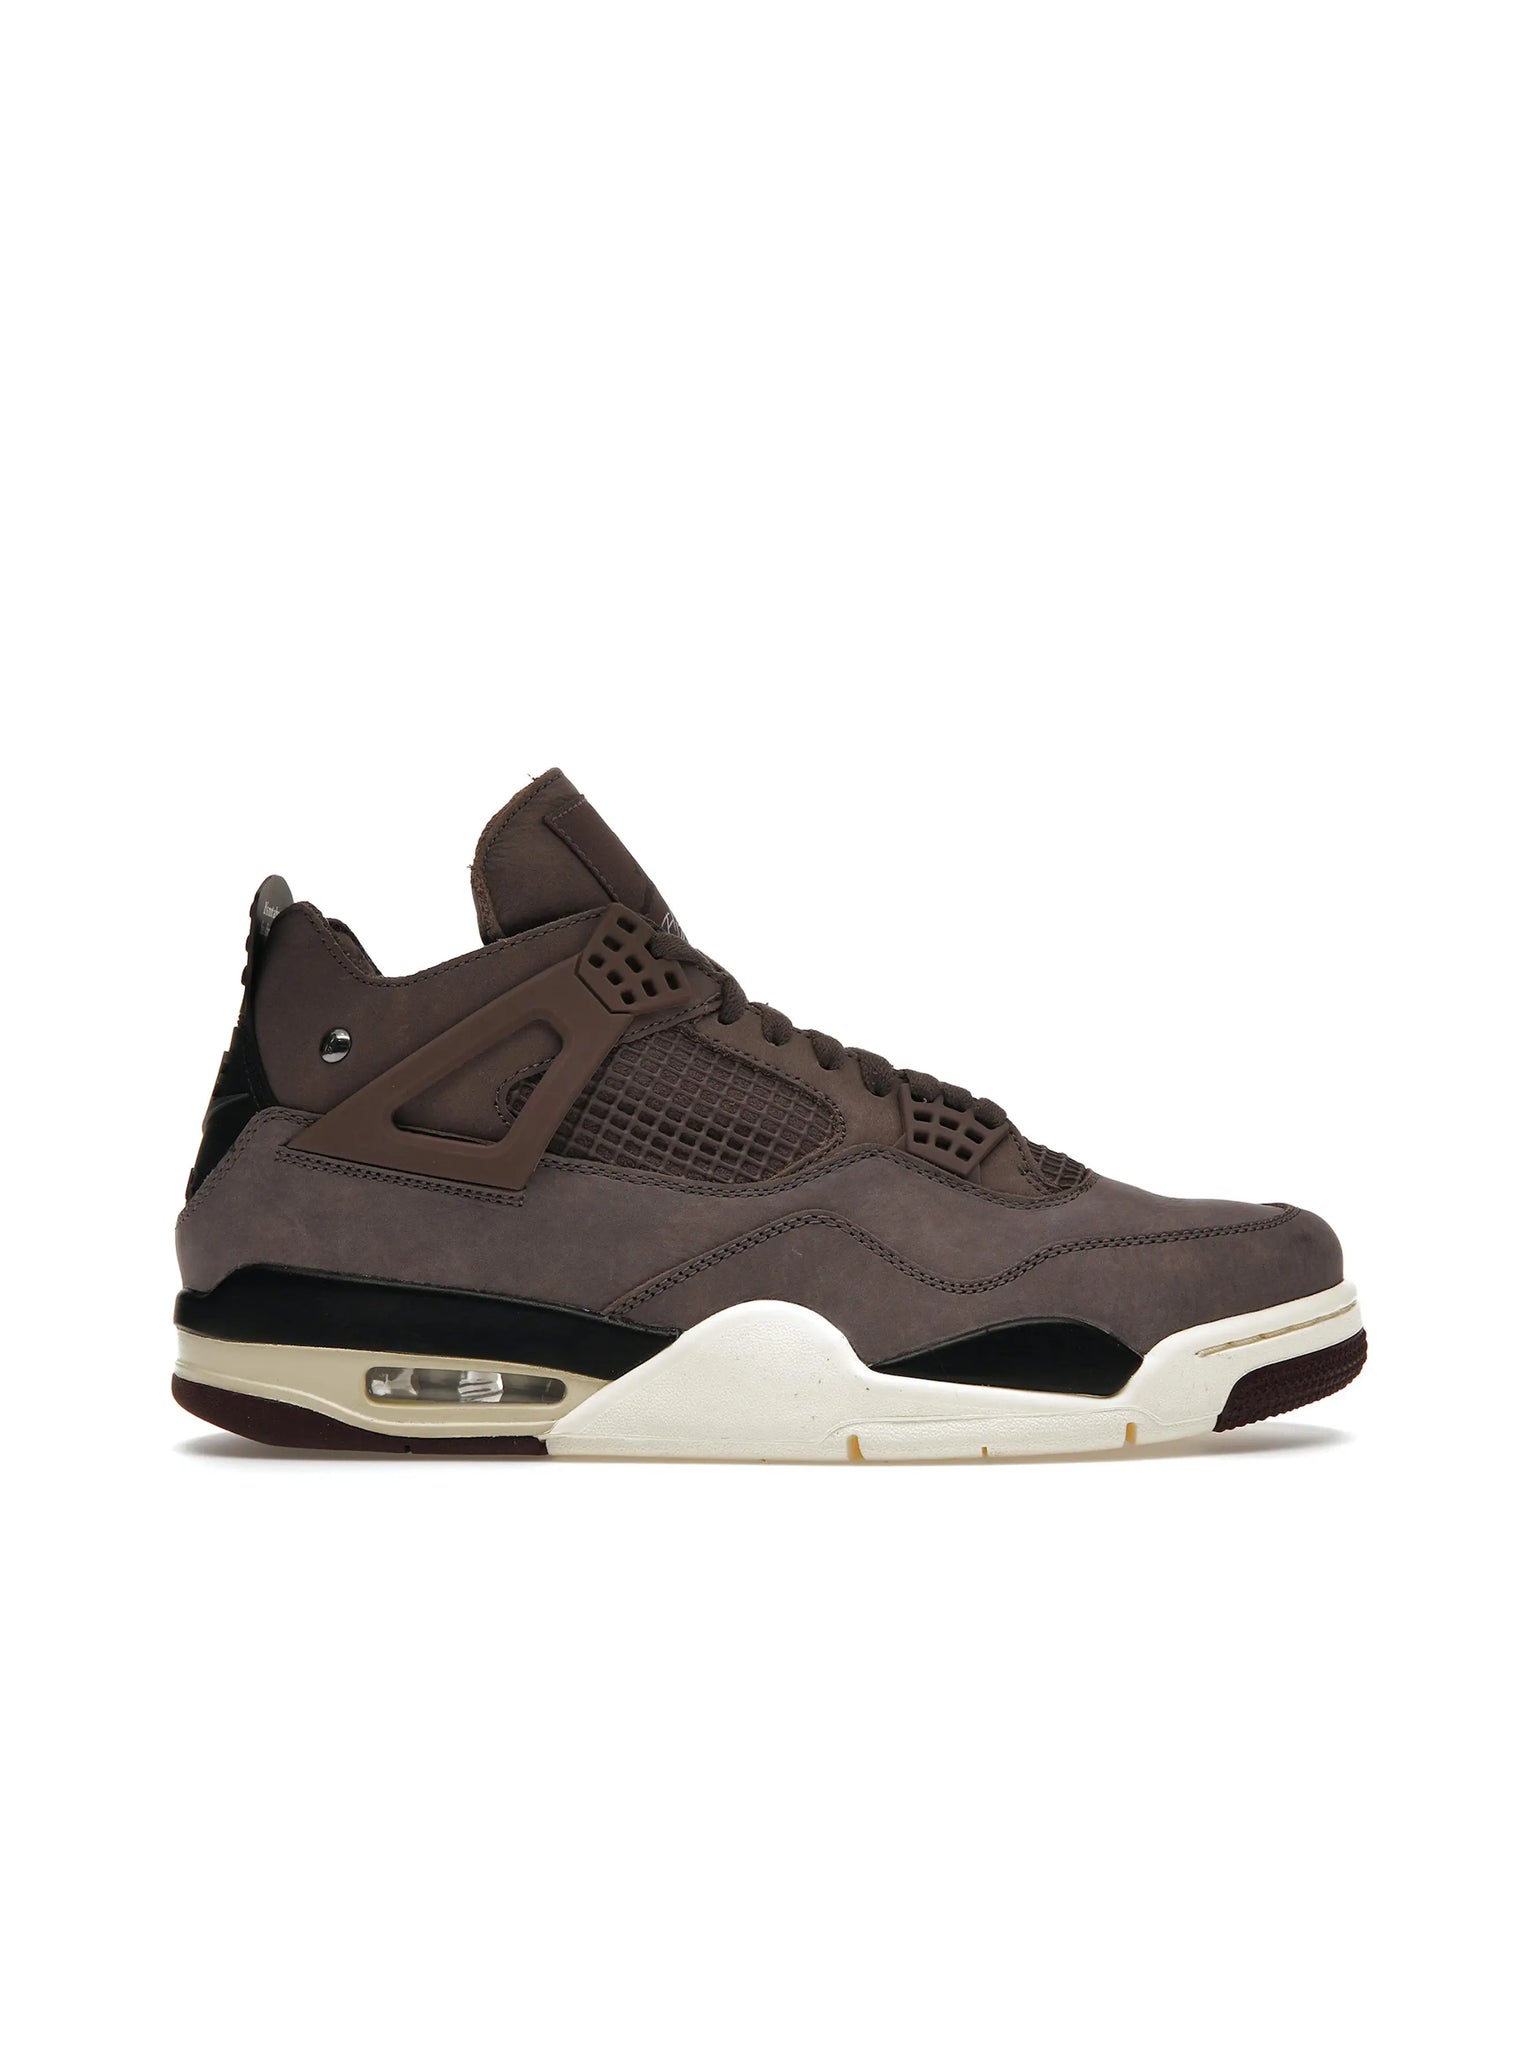 Nike Air Jordan 4 Retro A Ma Maniére Violet Ore in Auckland, New Zealand - Shop name